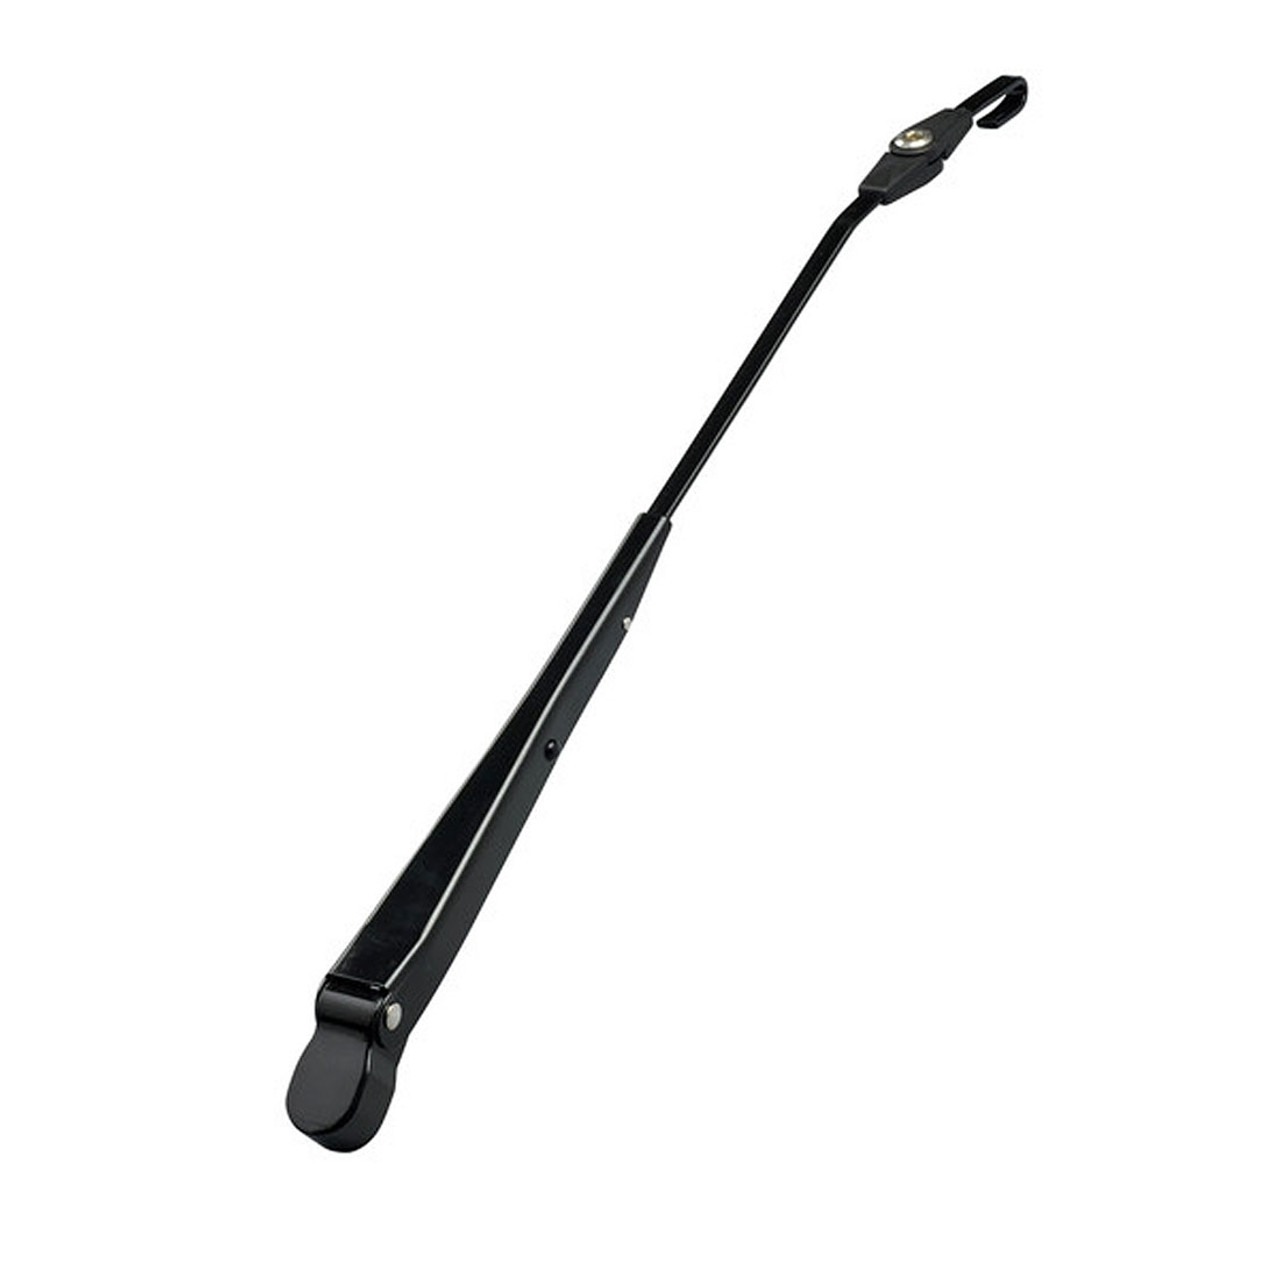 Wexco Wiper Arm 200718D